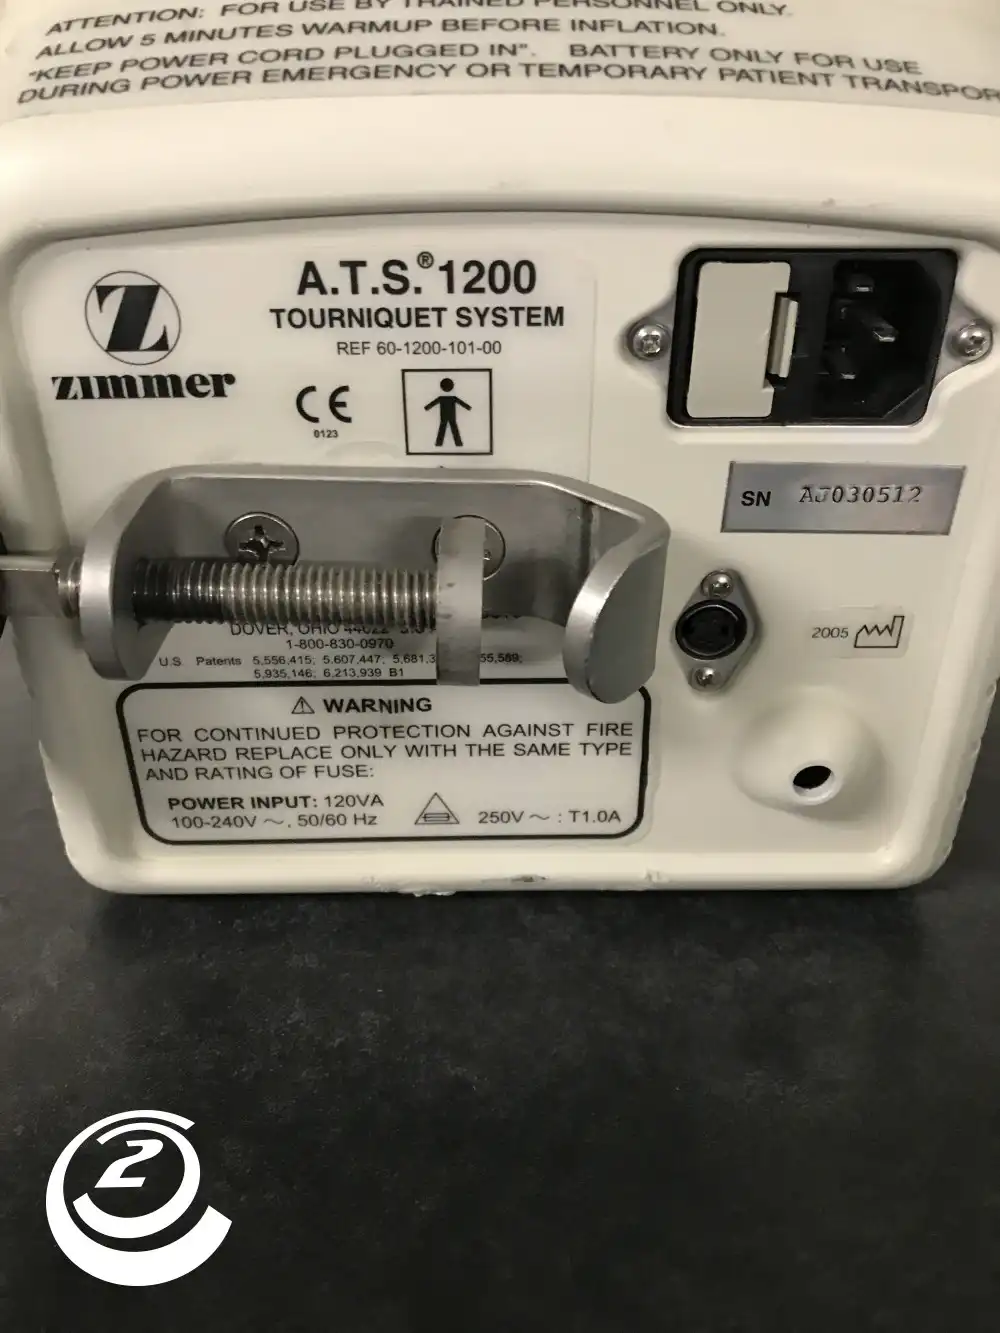 Zimmer A.T.S. 1200